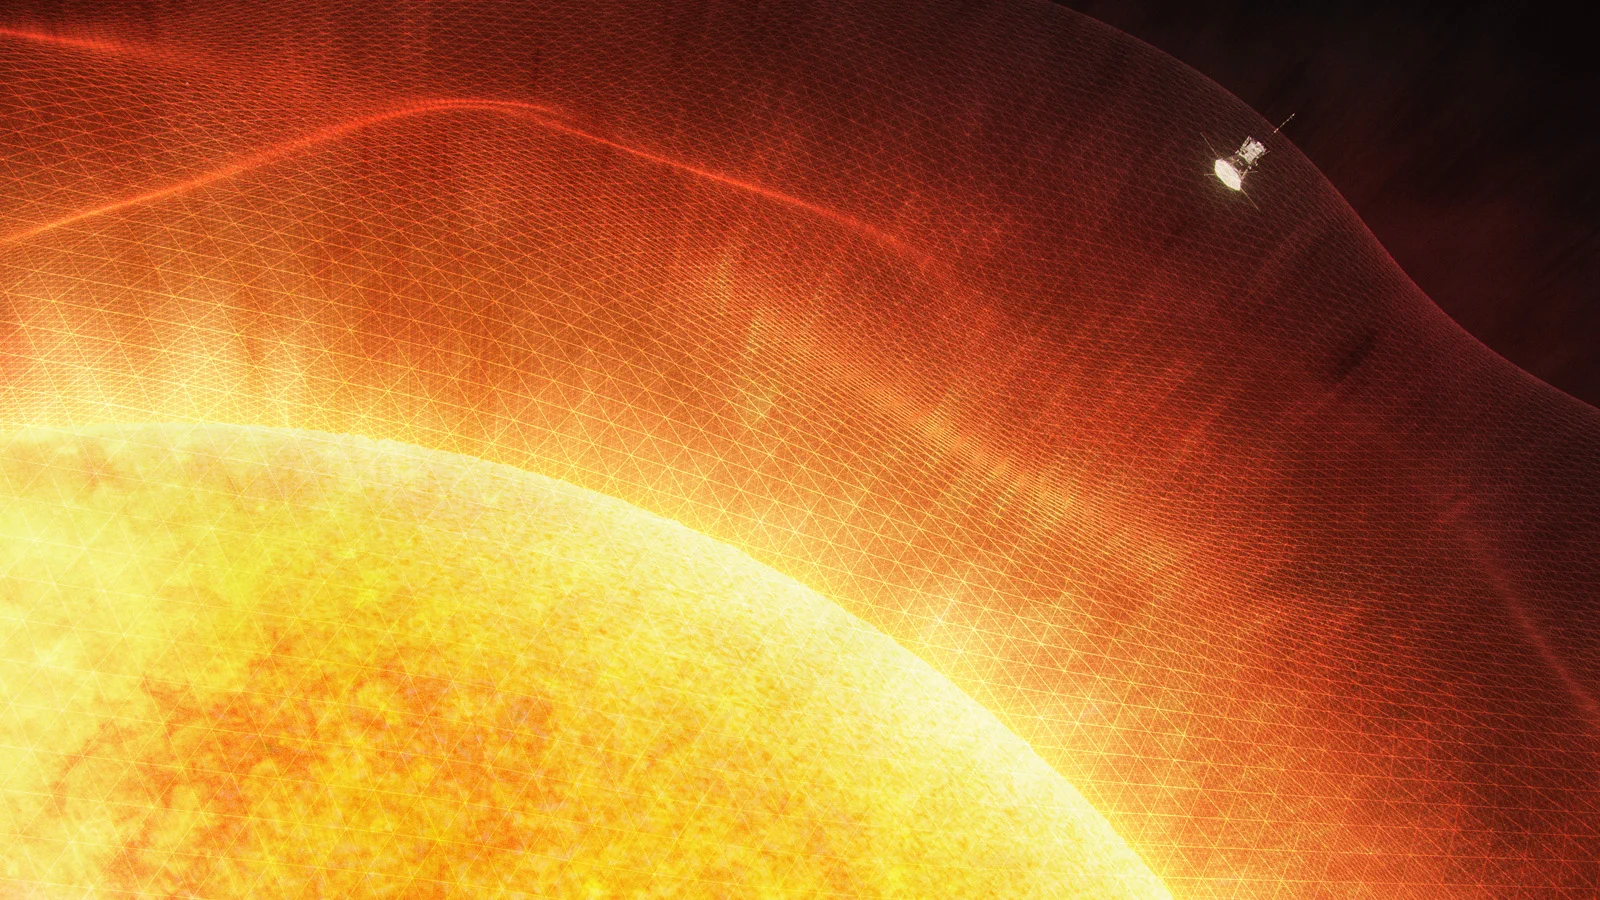 NASA's Parker Solar Probe becomes first spacecraft to 'touch' the Sun